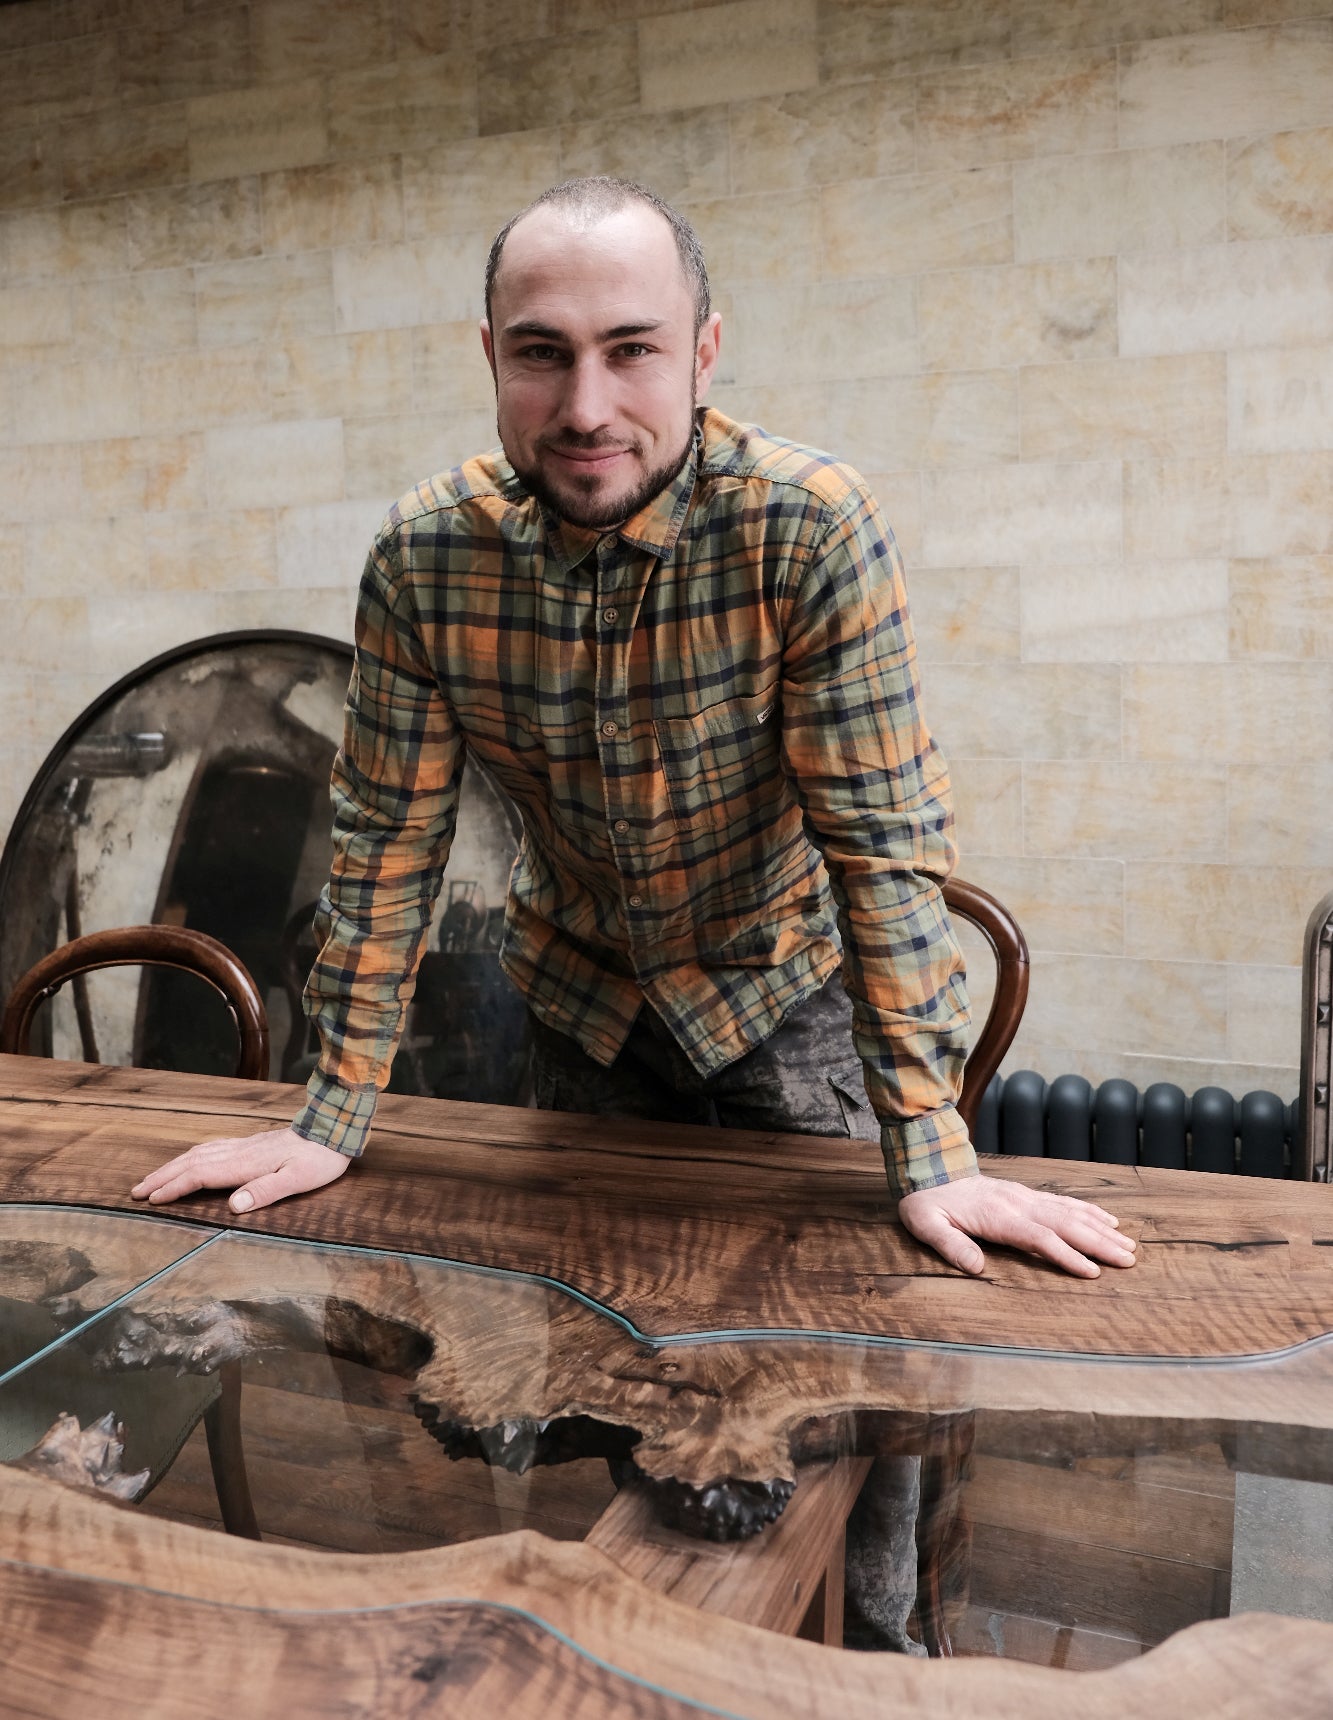 Egor Ivoilov photo. The director of Live Edge Creations, a master woodworker, artist and artisan working of over 10 years with Live Edge wood installtions, for both home and office.